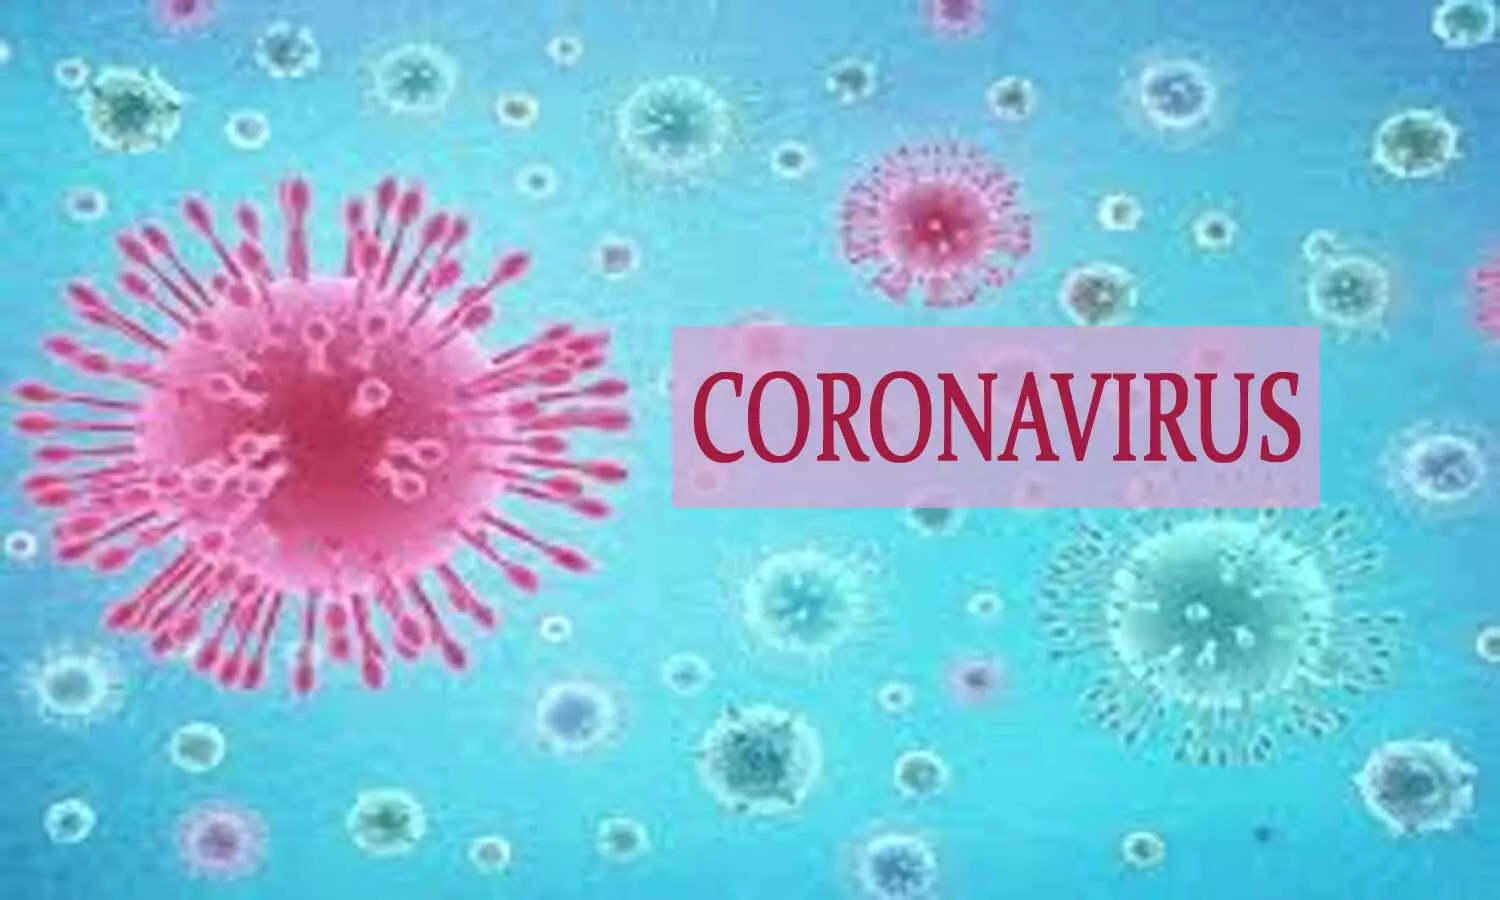 Mother to child transmission of COVID-19 infection, possible but rare